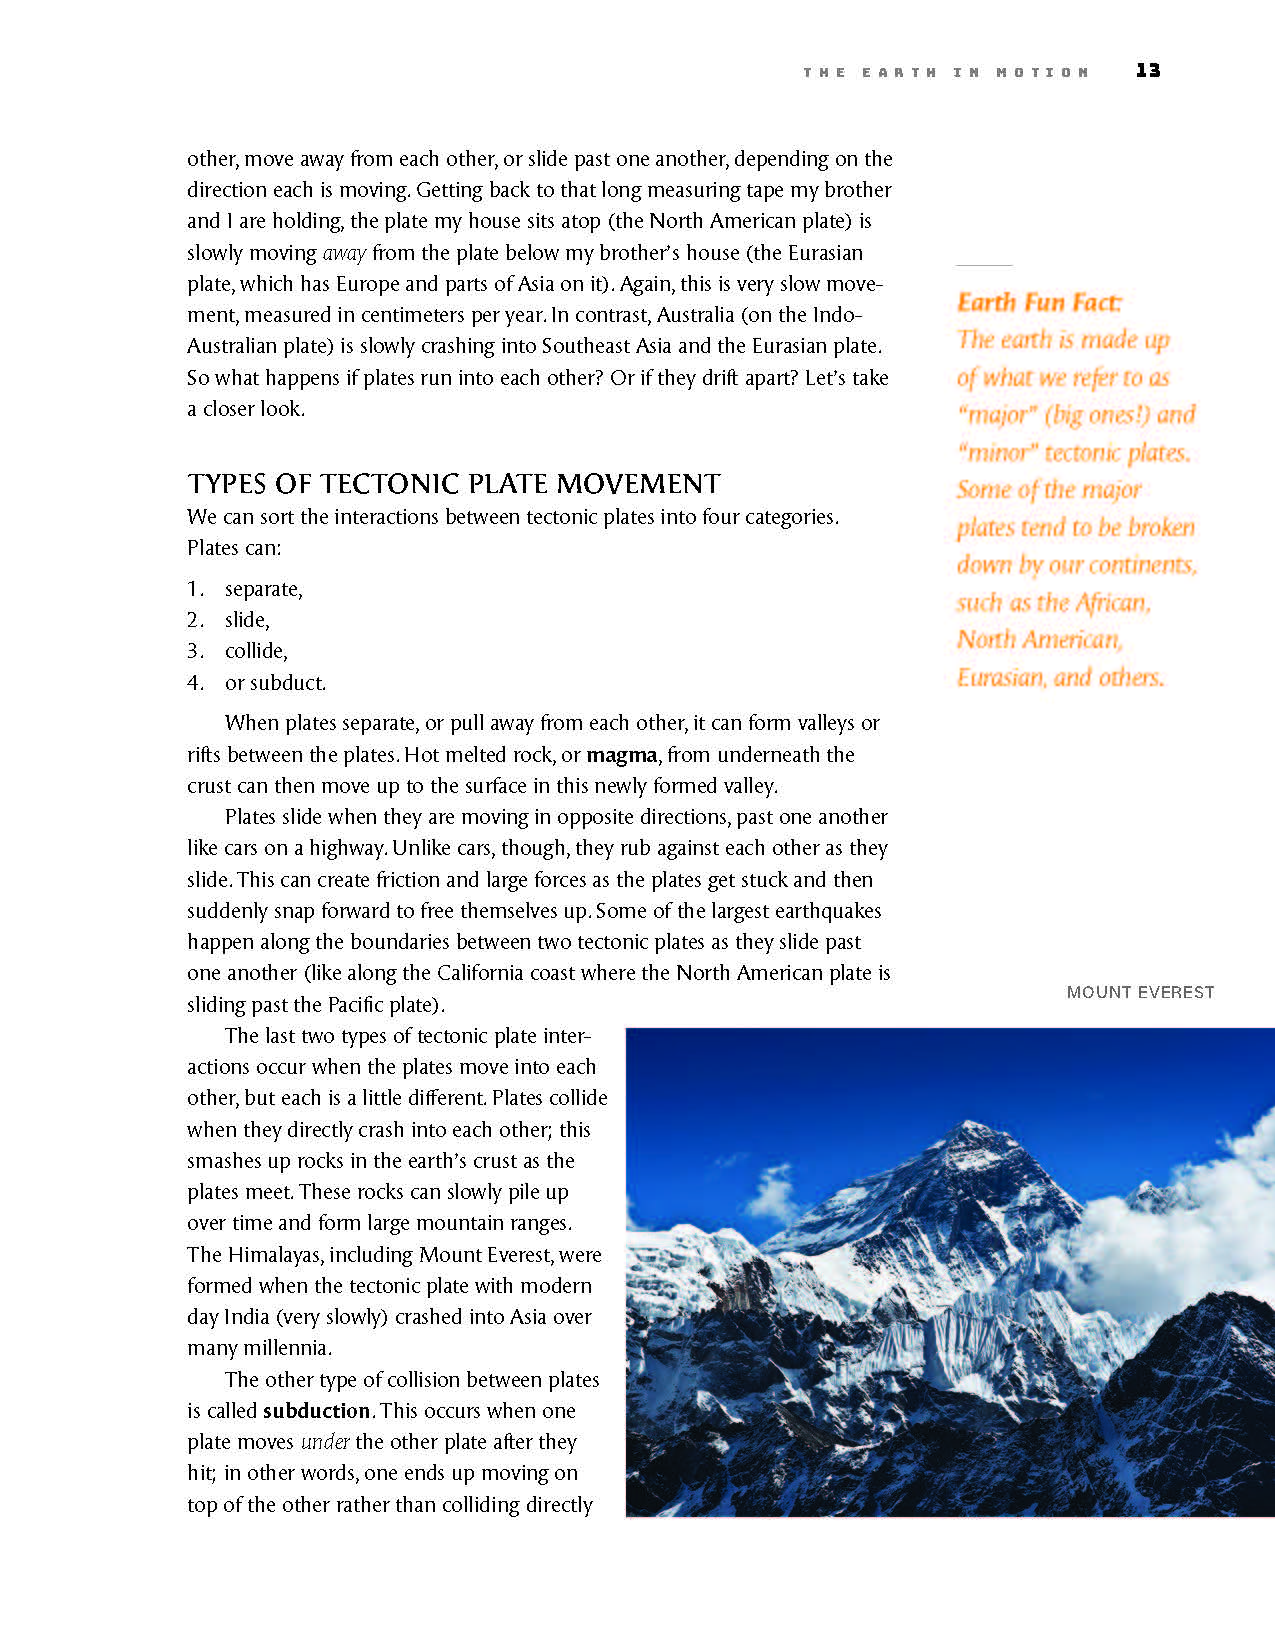 FOS-Earth-textbook_interior-marketing_Page_025